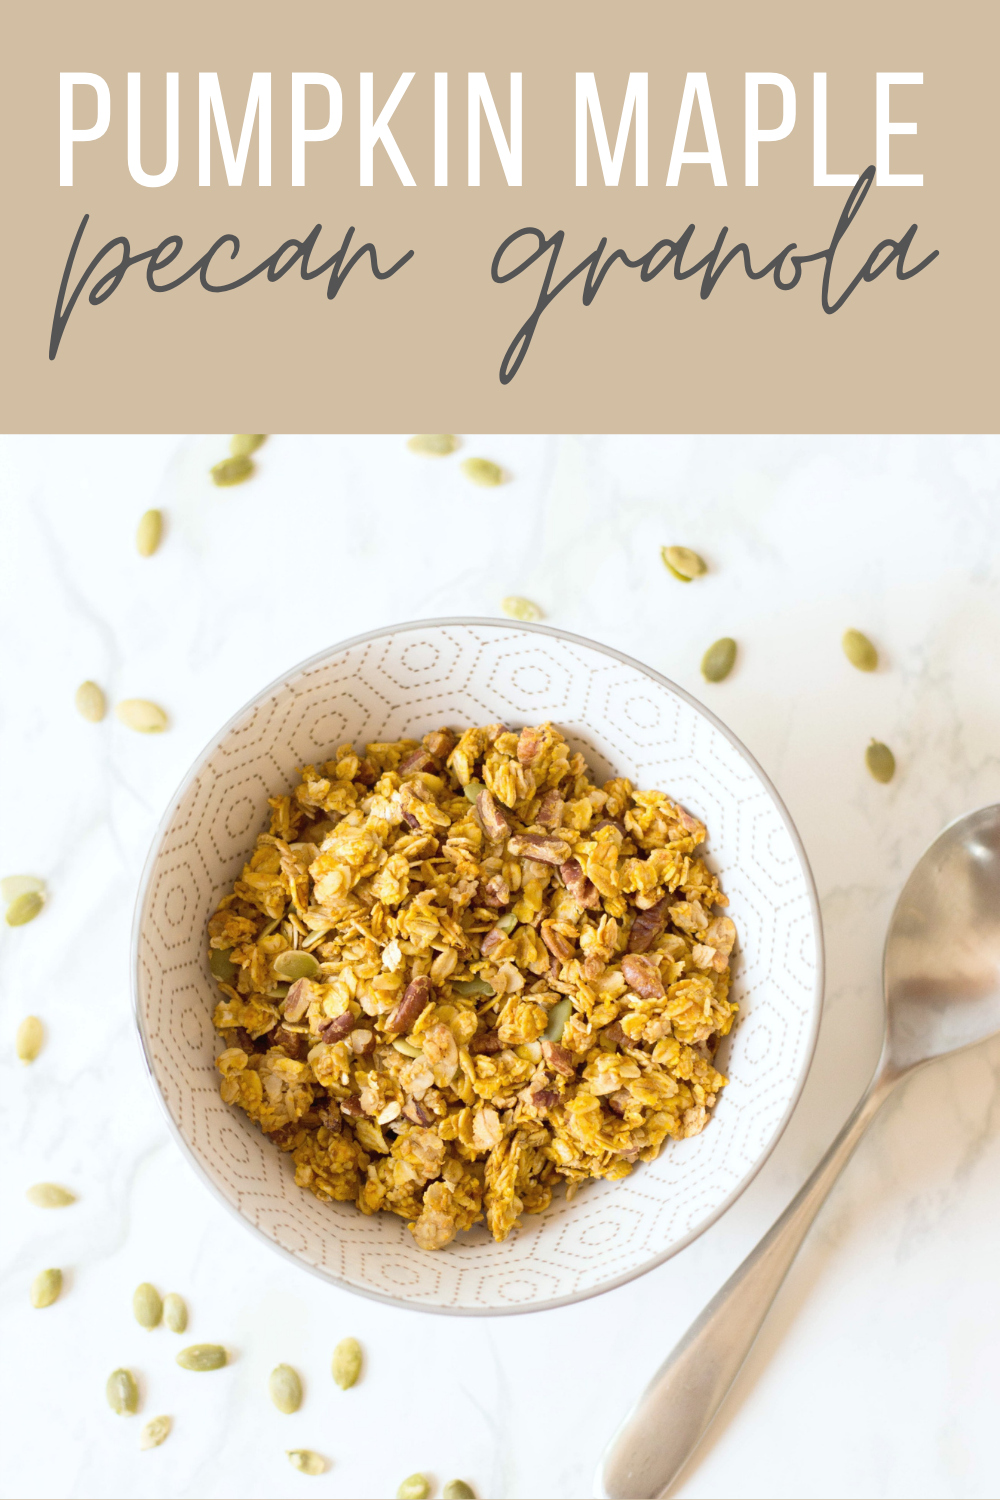 It's that time of year, the air is getting crisp and the leaves are starting to change. What better way to get into fall than with this delicious Pumpkin Maple Pecan Granola. The great part is that granola is so versatile that you can get creative with it. #granola #granolarecipe #pumpkineverything #pumpkinmaplepecan #maplepecan #easyrecipes #easygranolarecipes